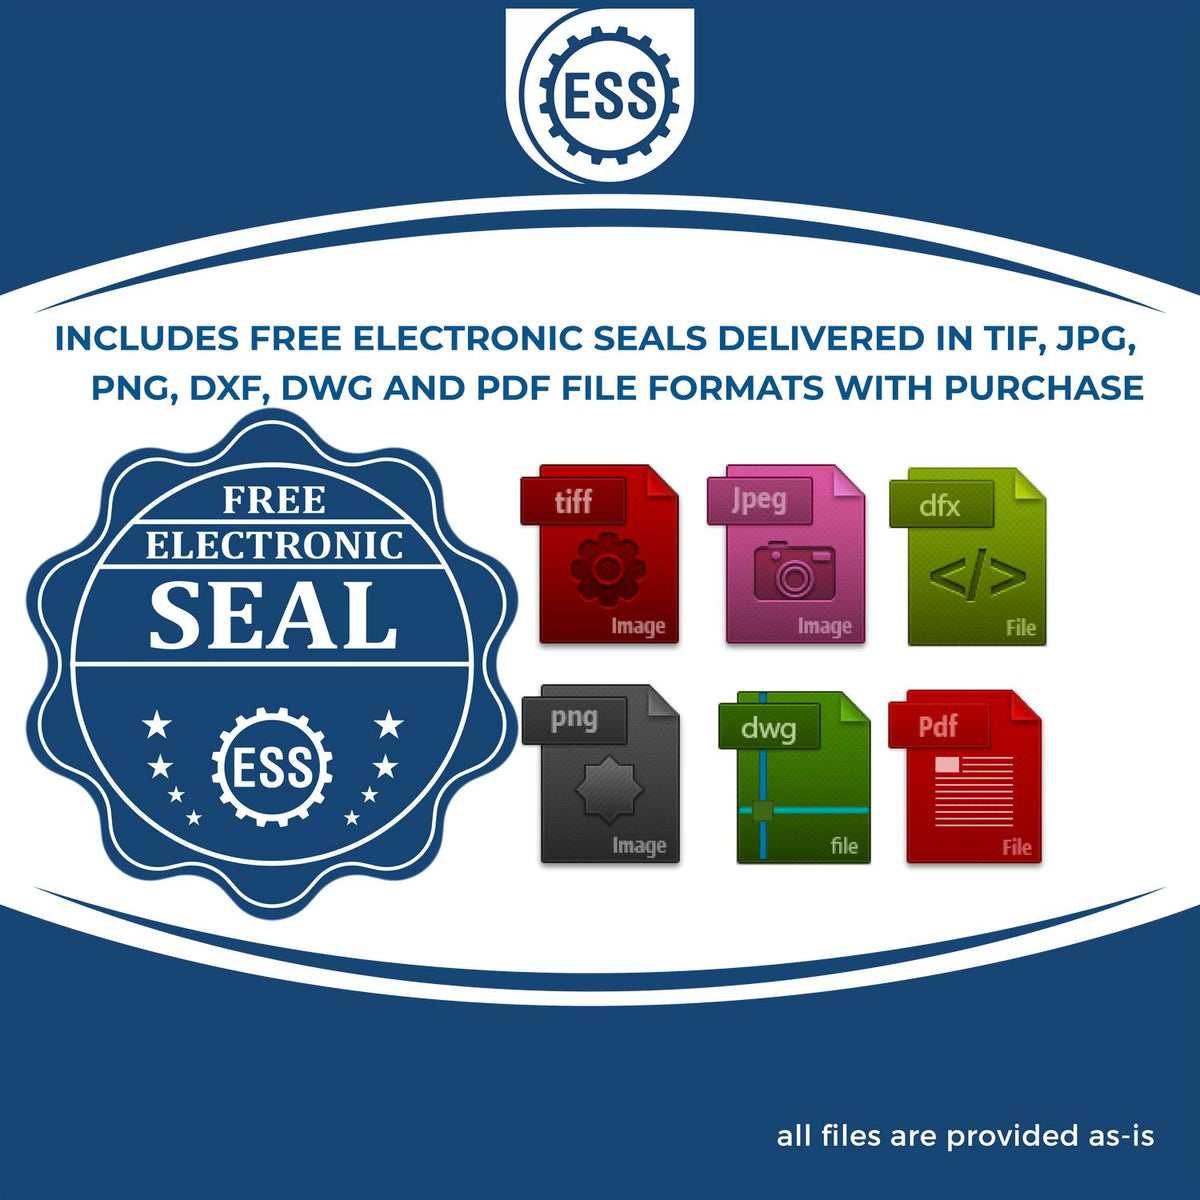 An infographic for the free electronic seal for the Long Reach Louisiana PE Seal illustrating the different file type icons such as DXF, DWG, TIF, JPG and PNG.